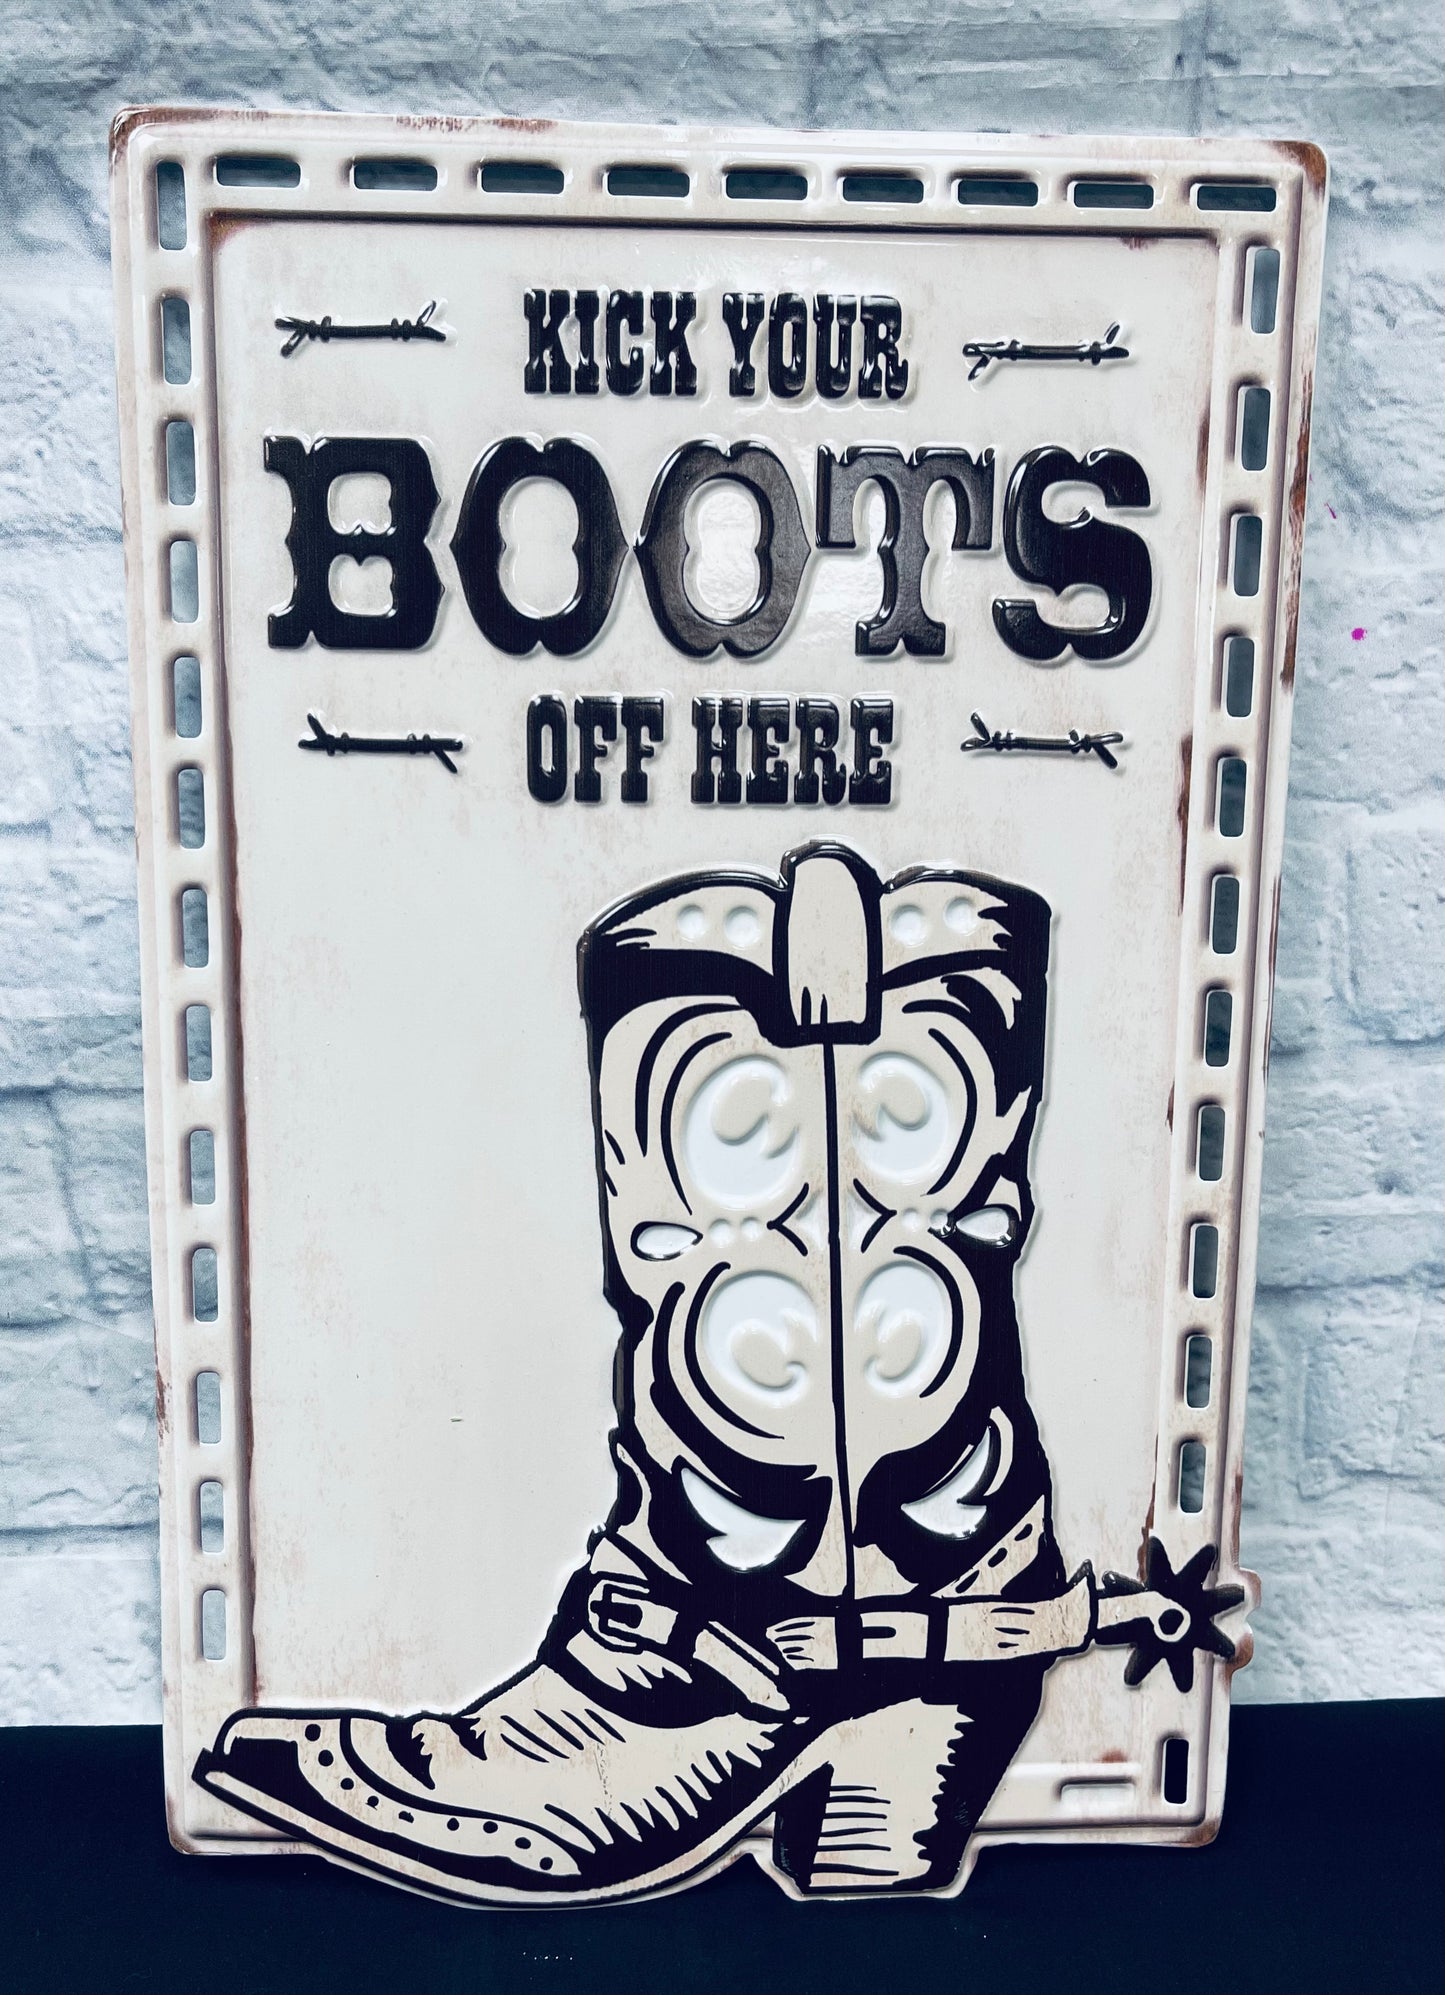 “Kick Your Boots Off Here”